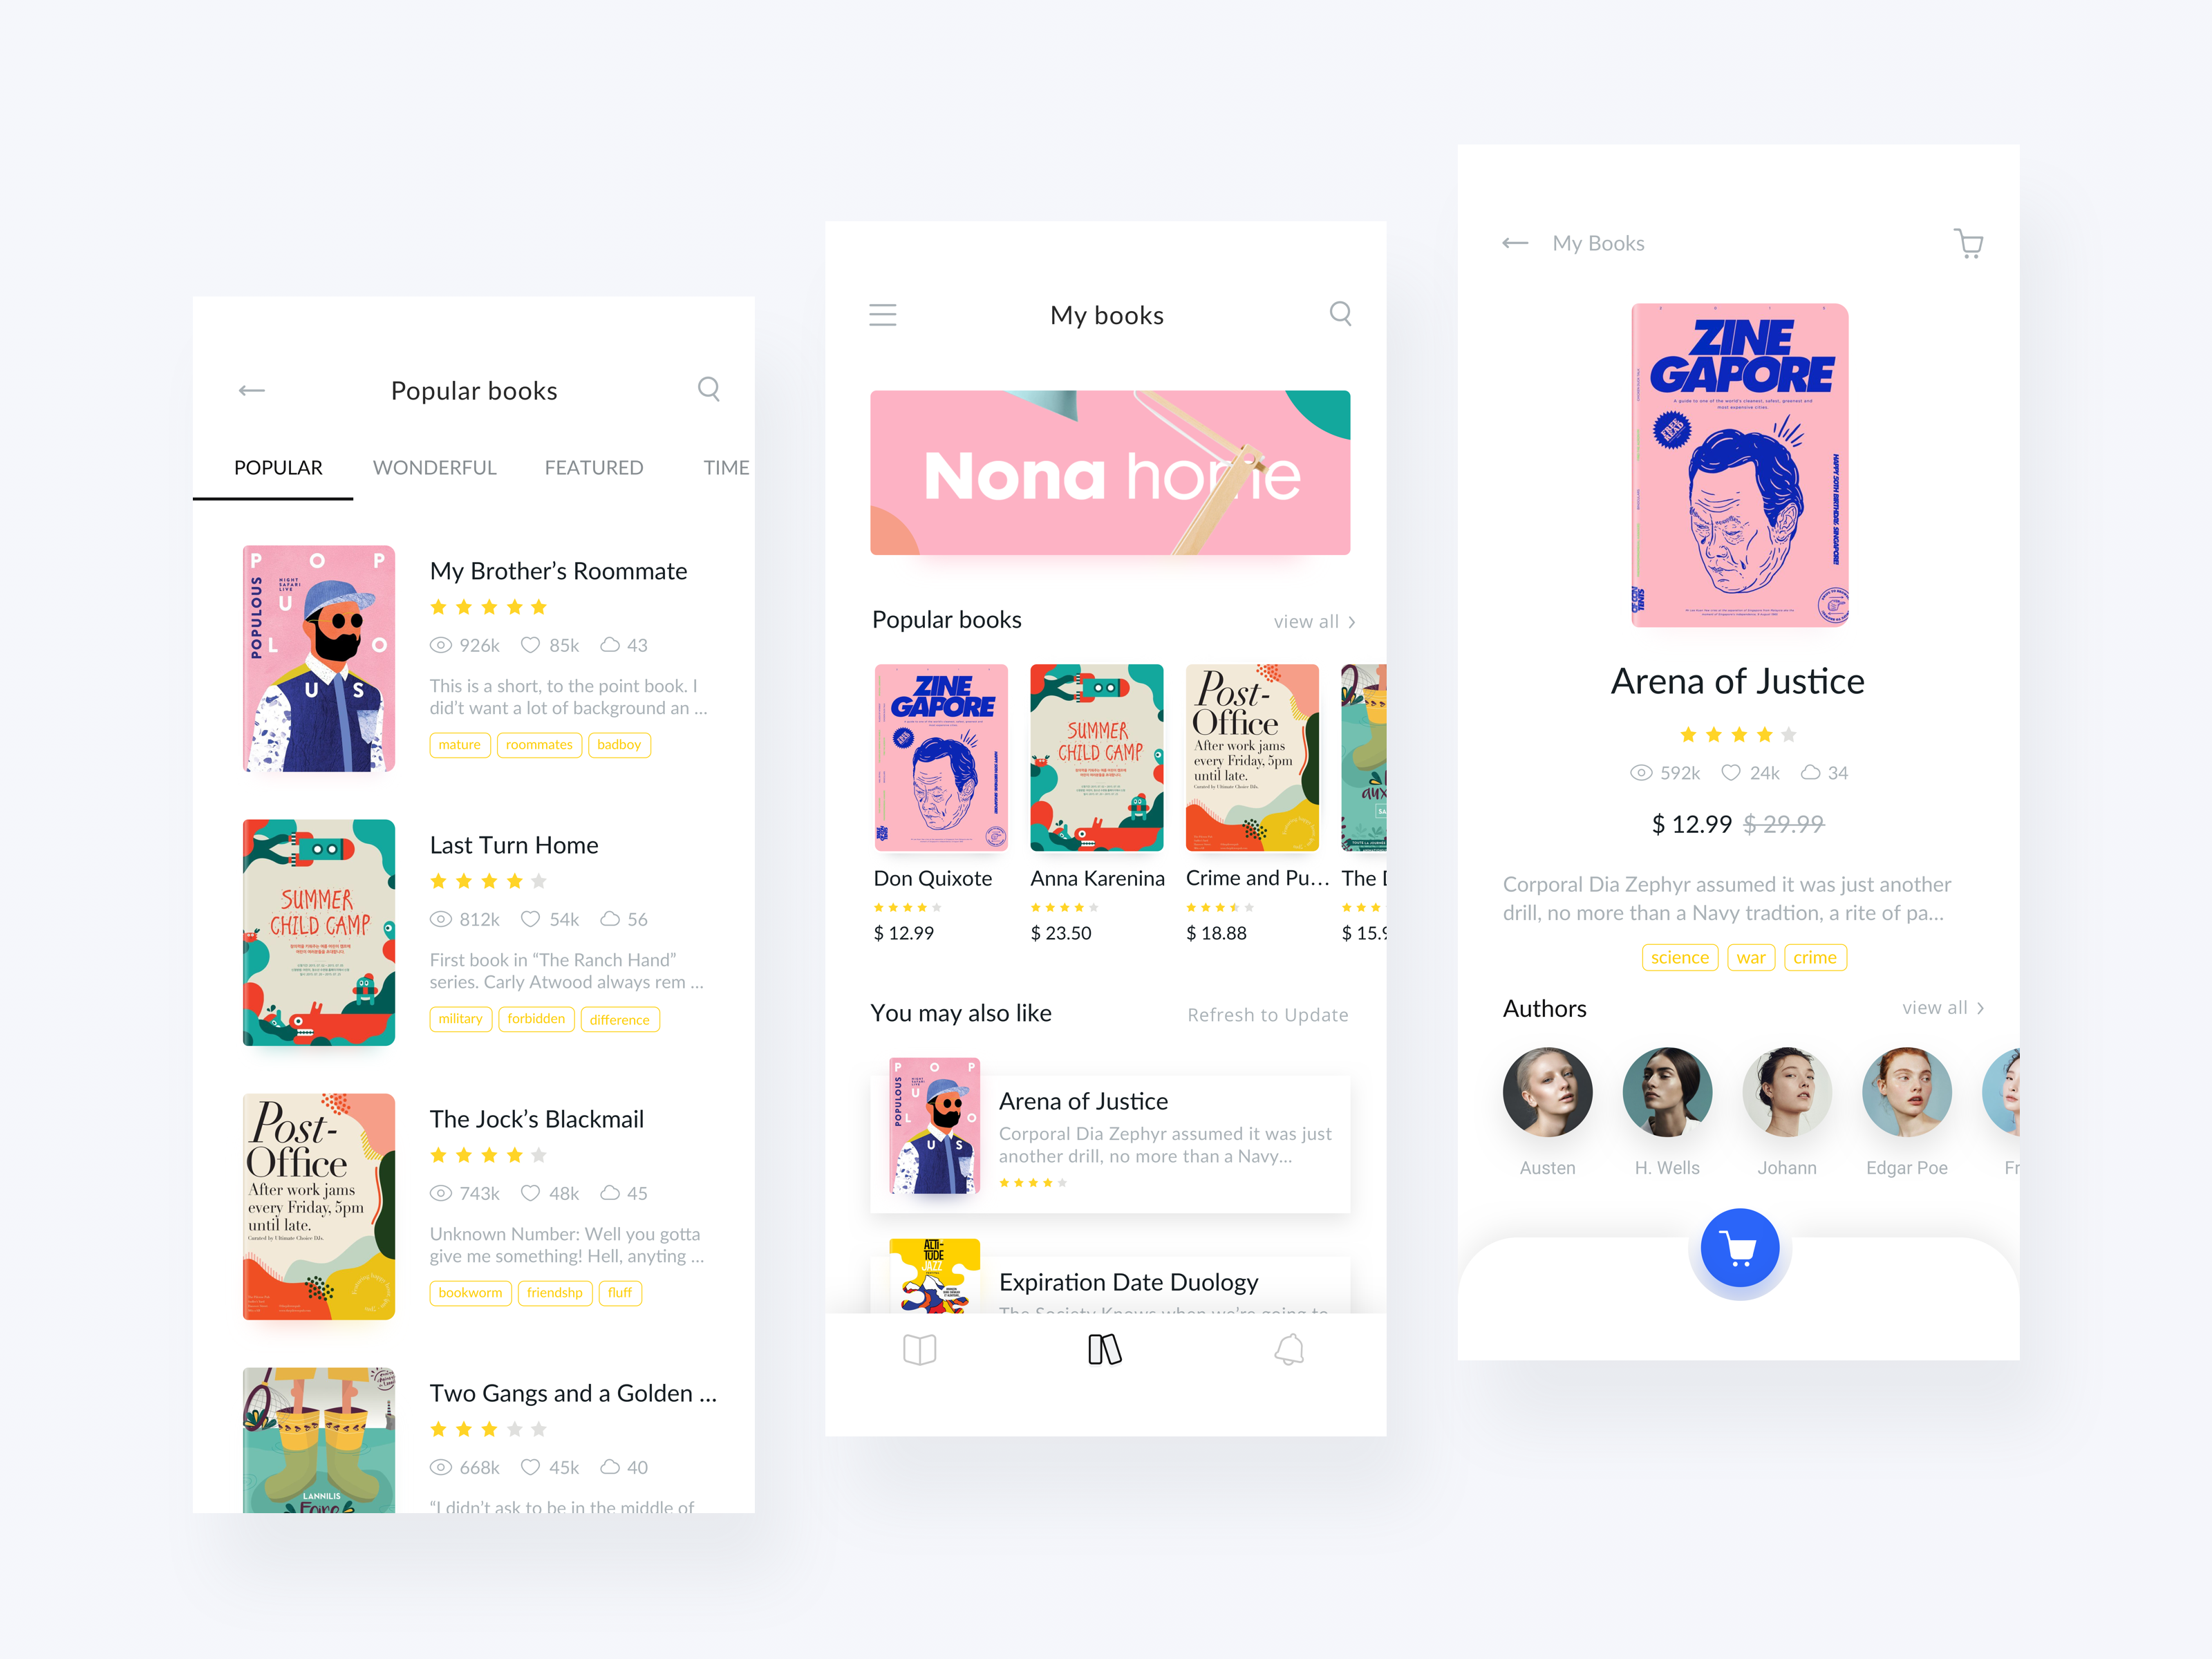 Dribbble - attached_1.png by Regen G.